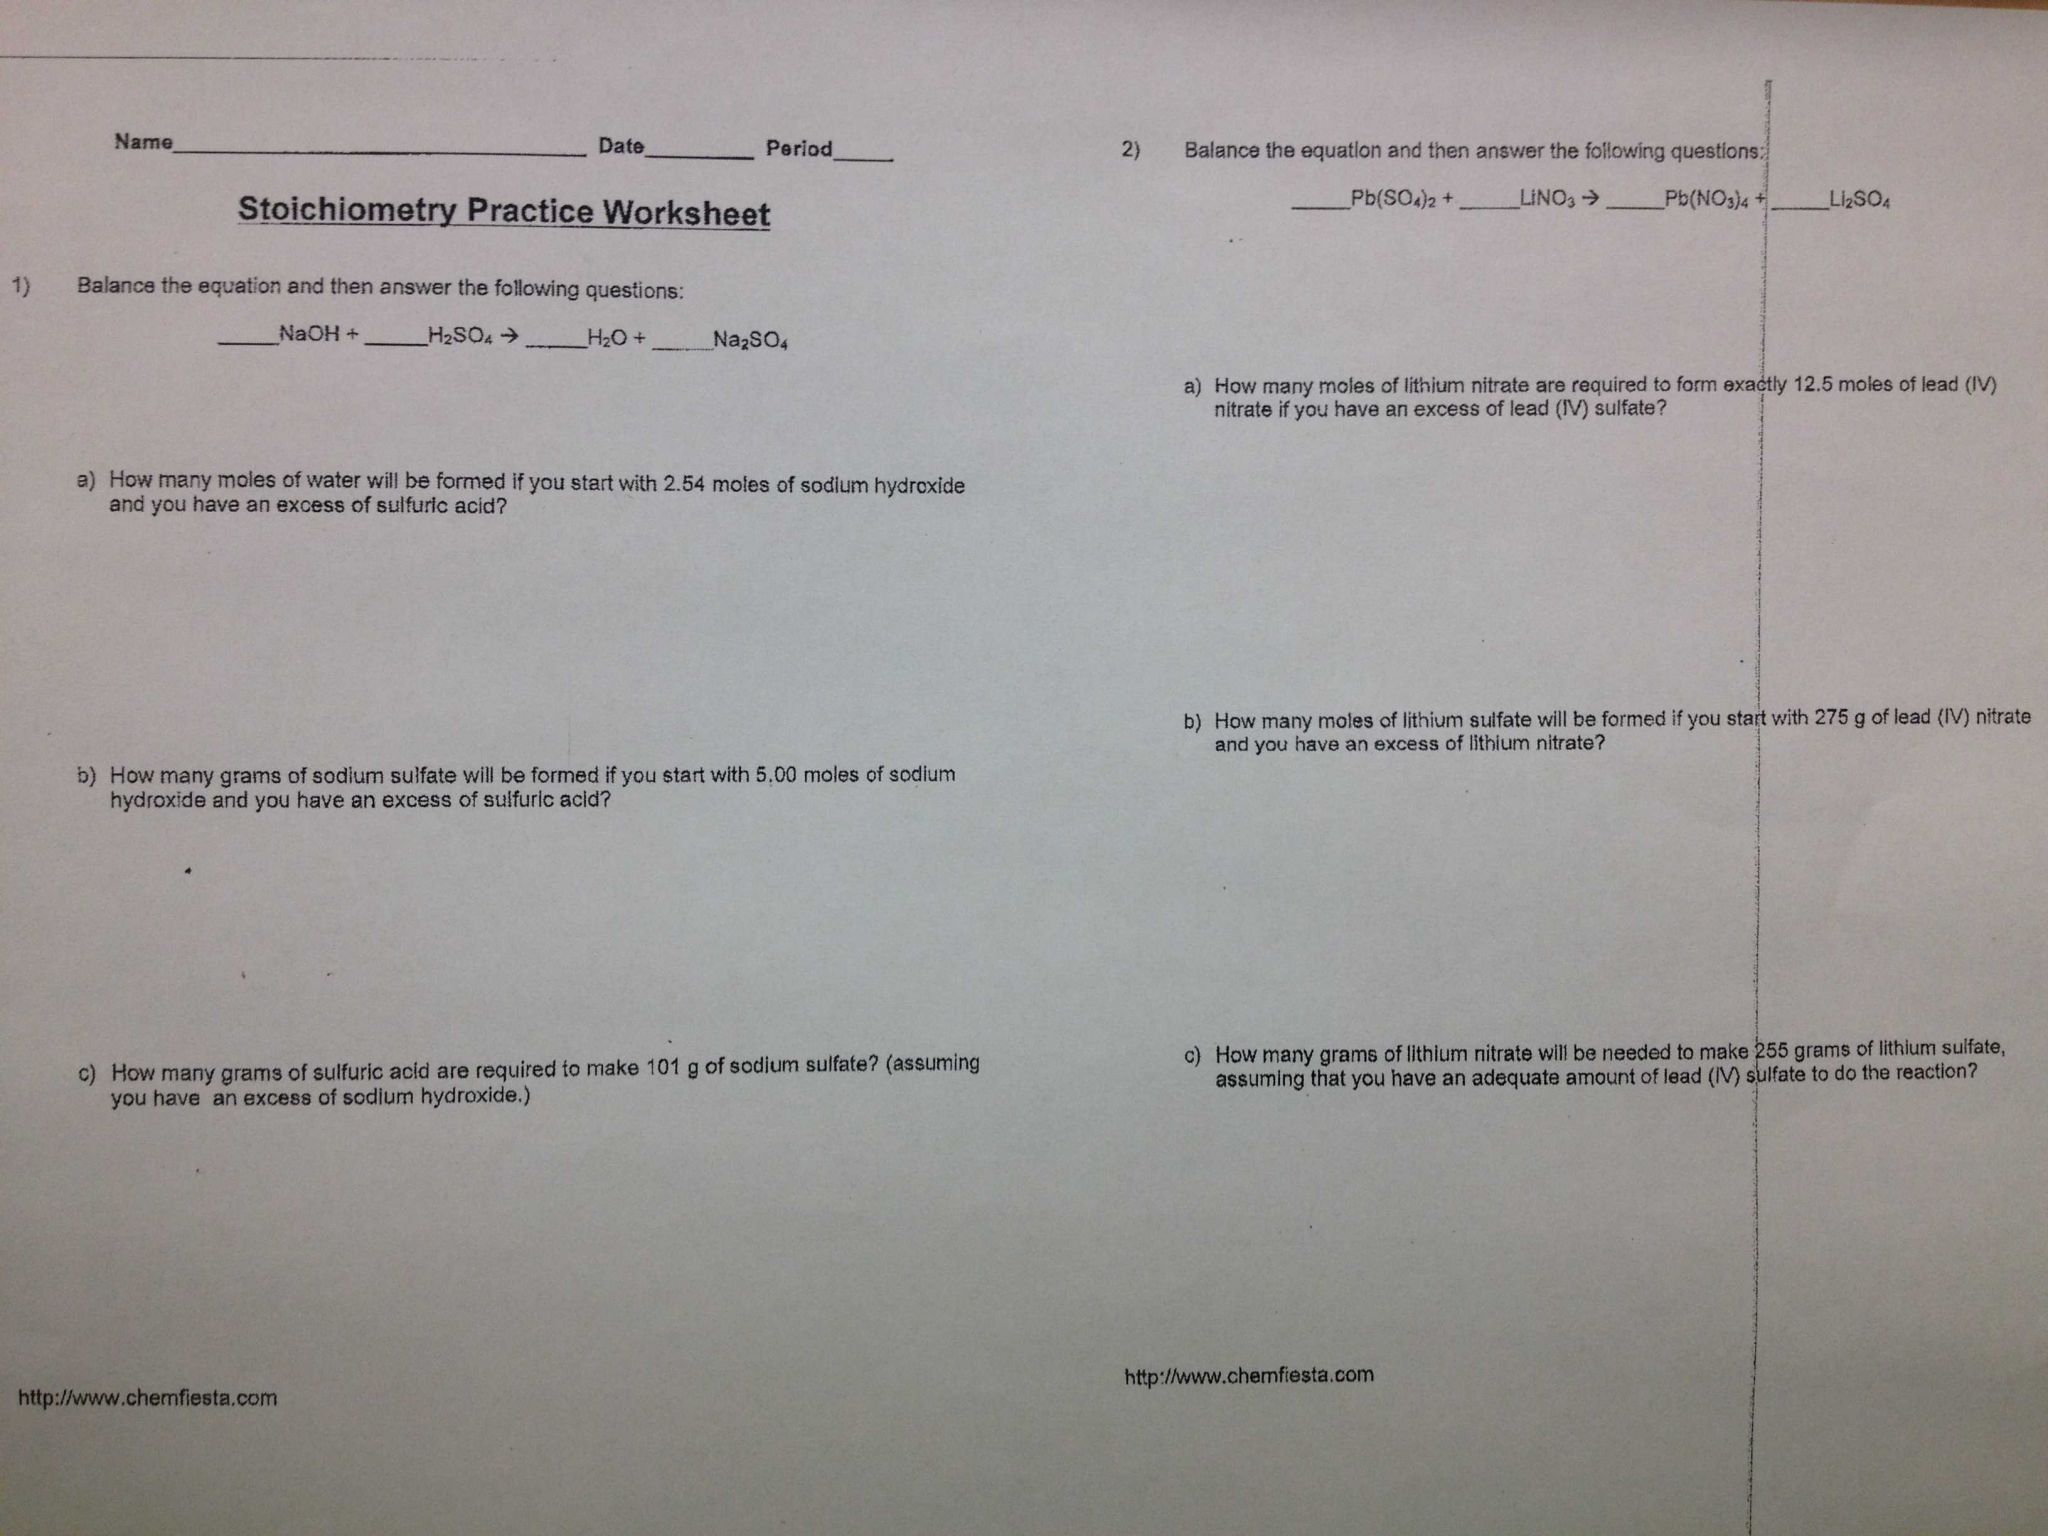 Introduction to Energy Worksheet Answer Key as Well as Stoichiometry Practice Worksheet Jpg